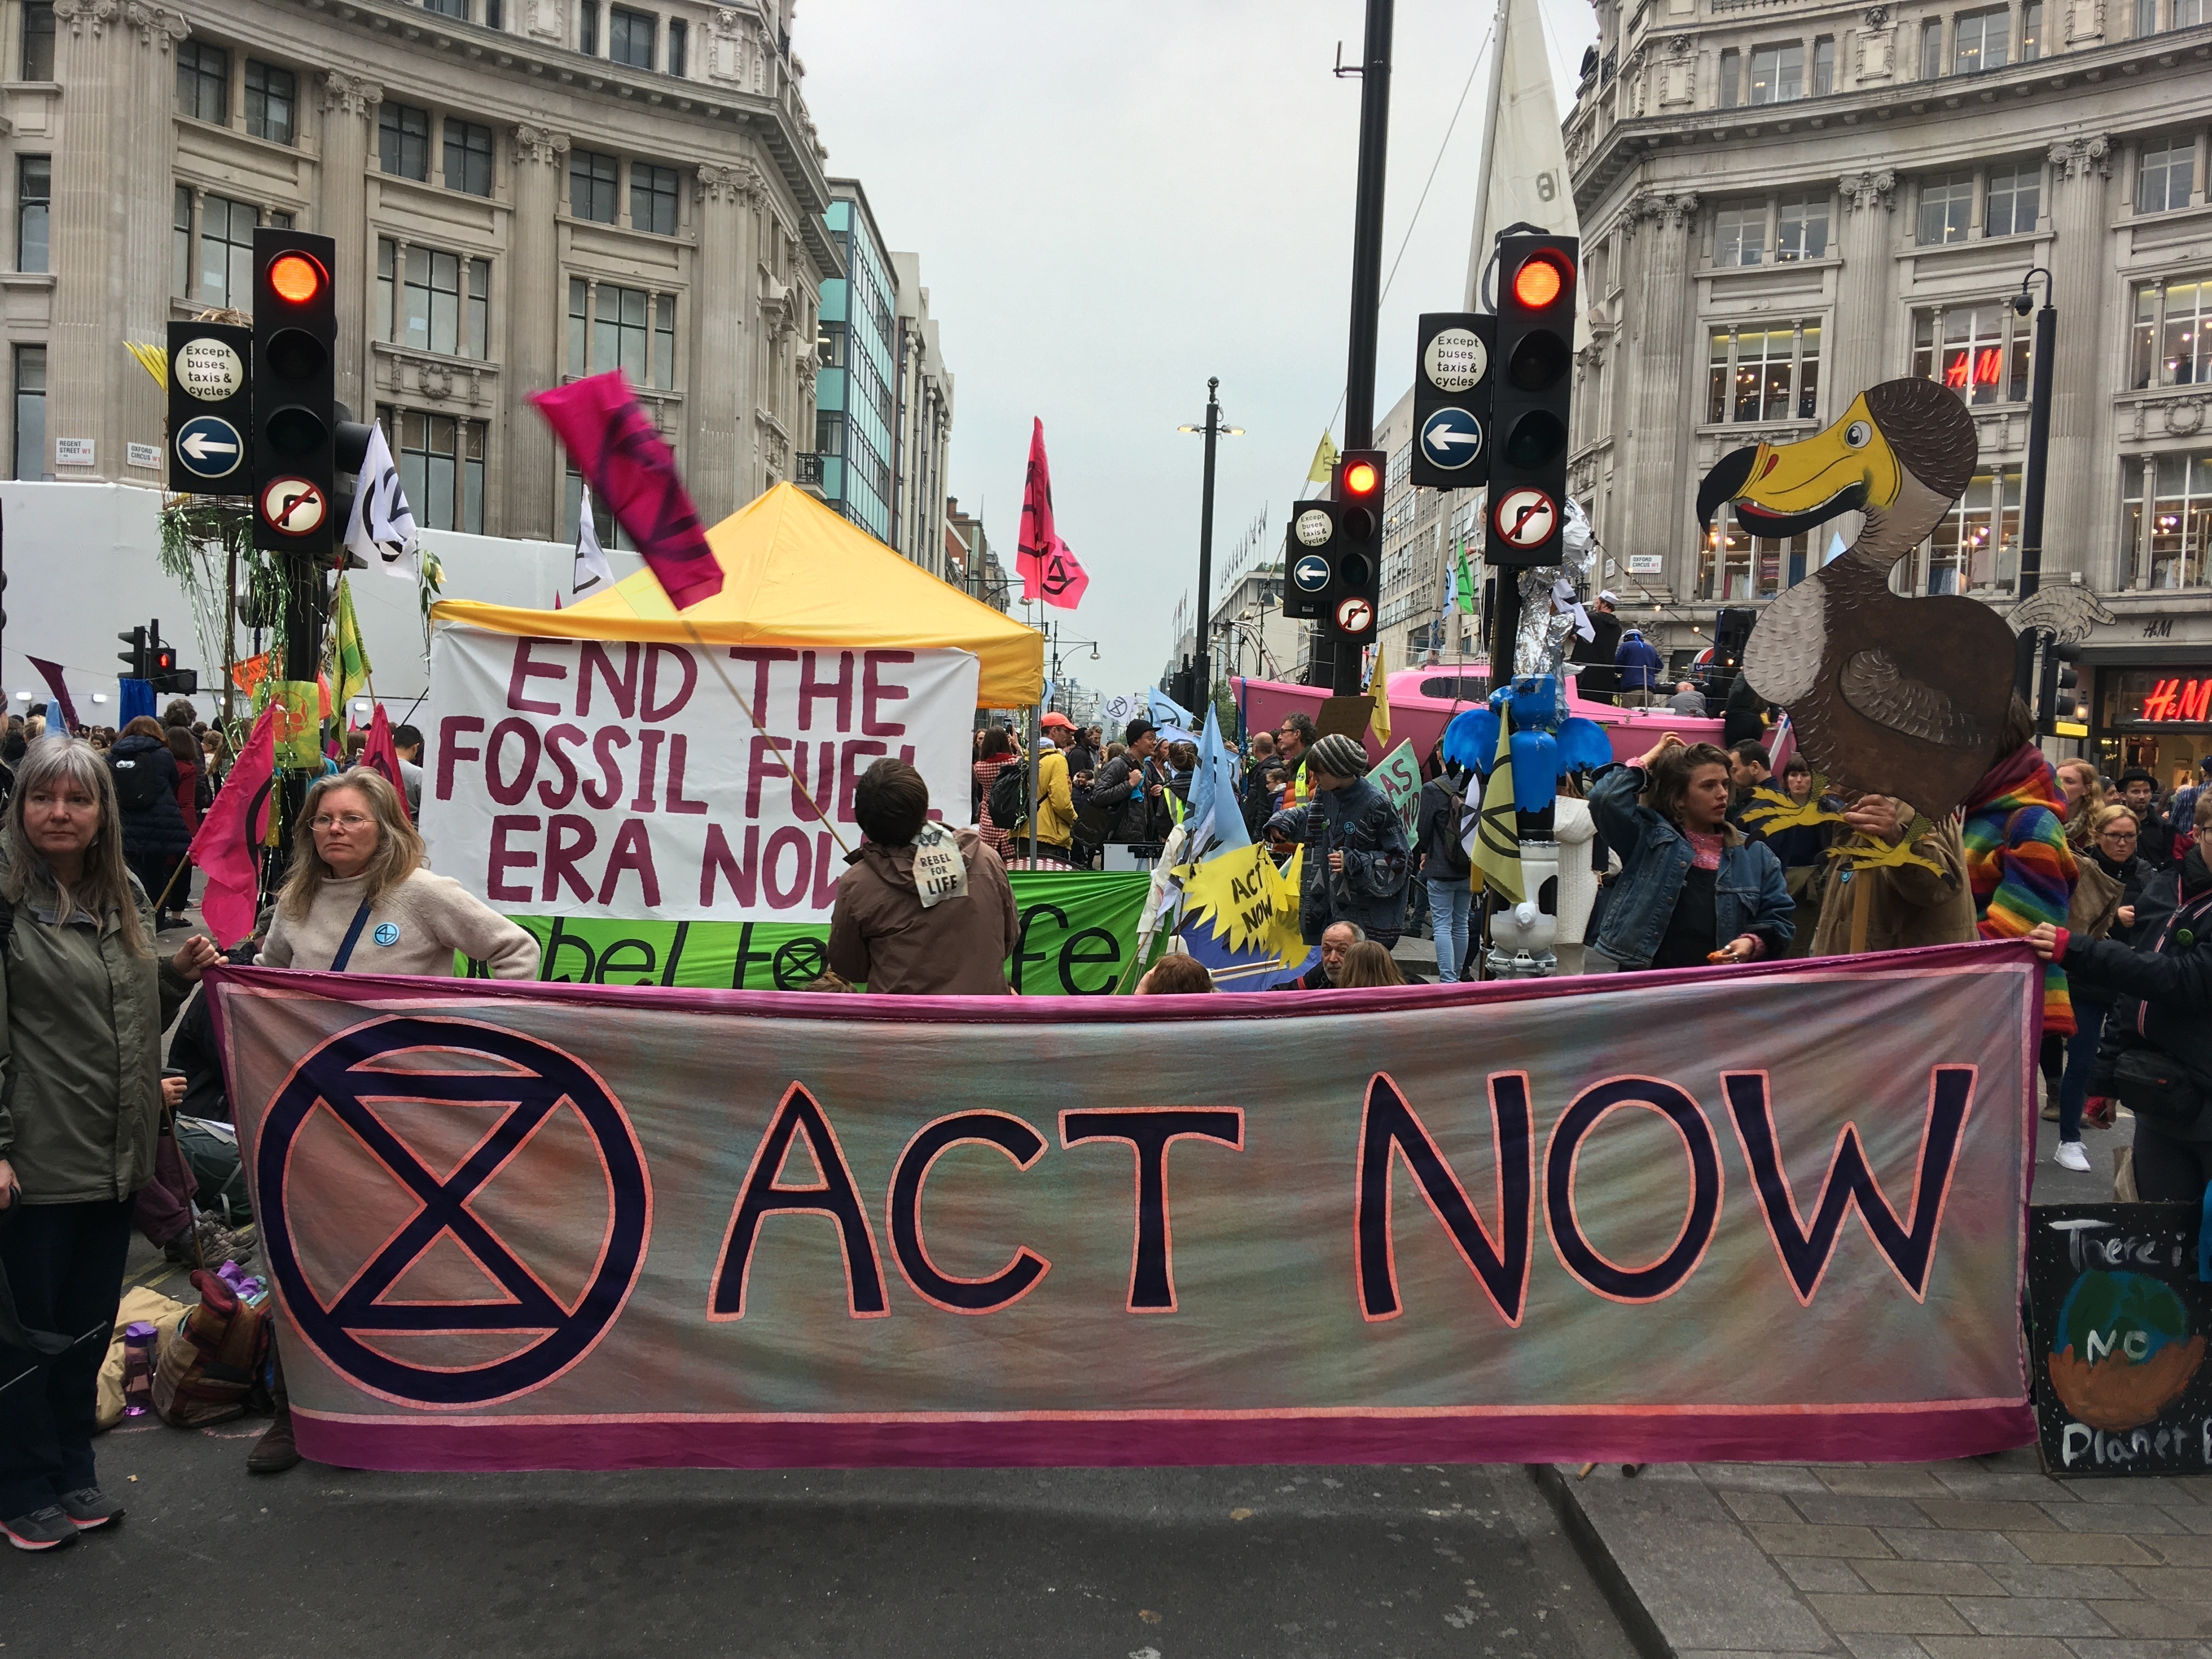 Extinction Rebellion protesters to occupy London “until our demands are met”